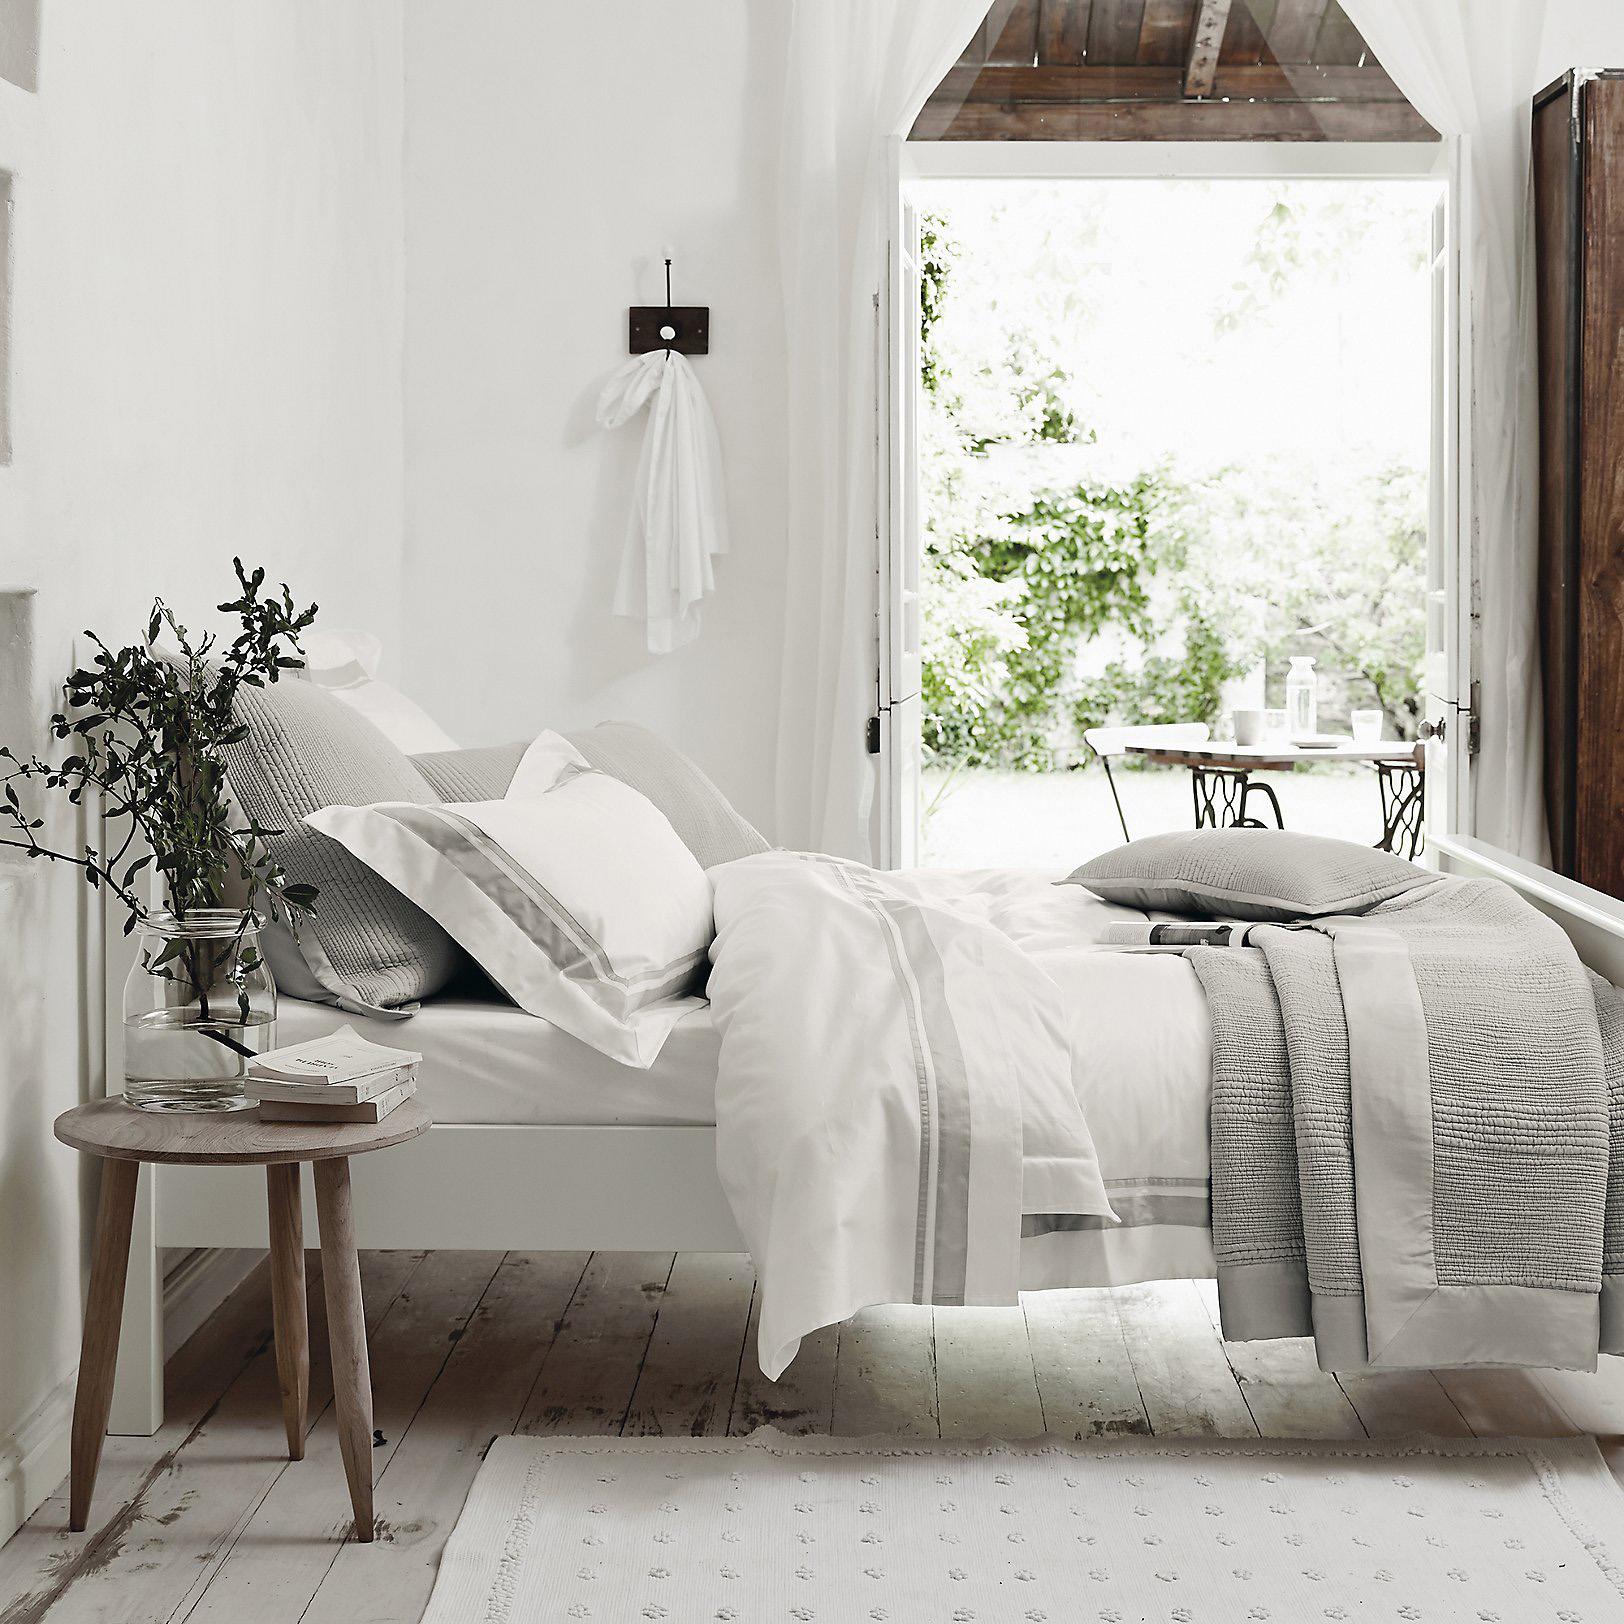 White bed linen in a guest bedroom